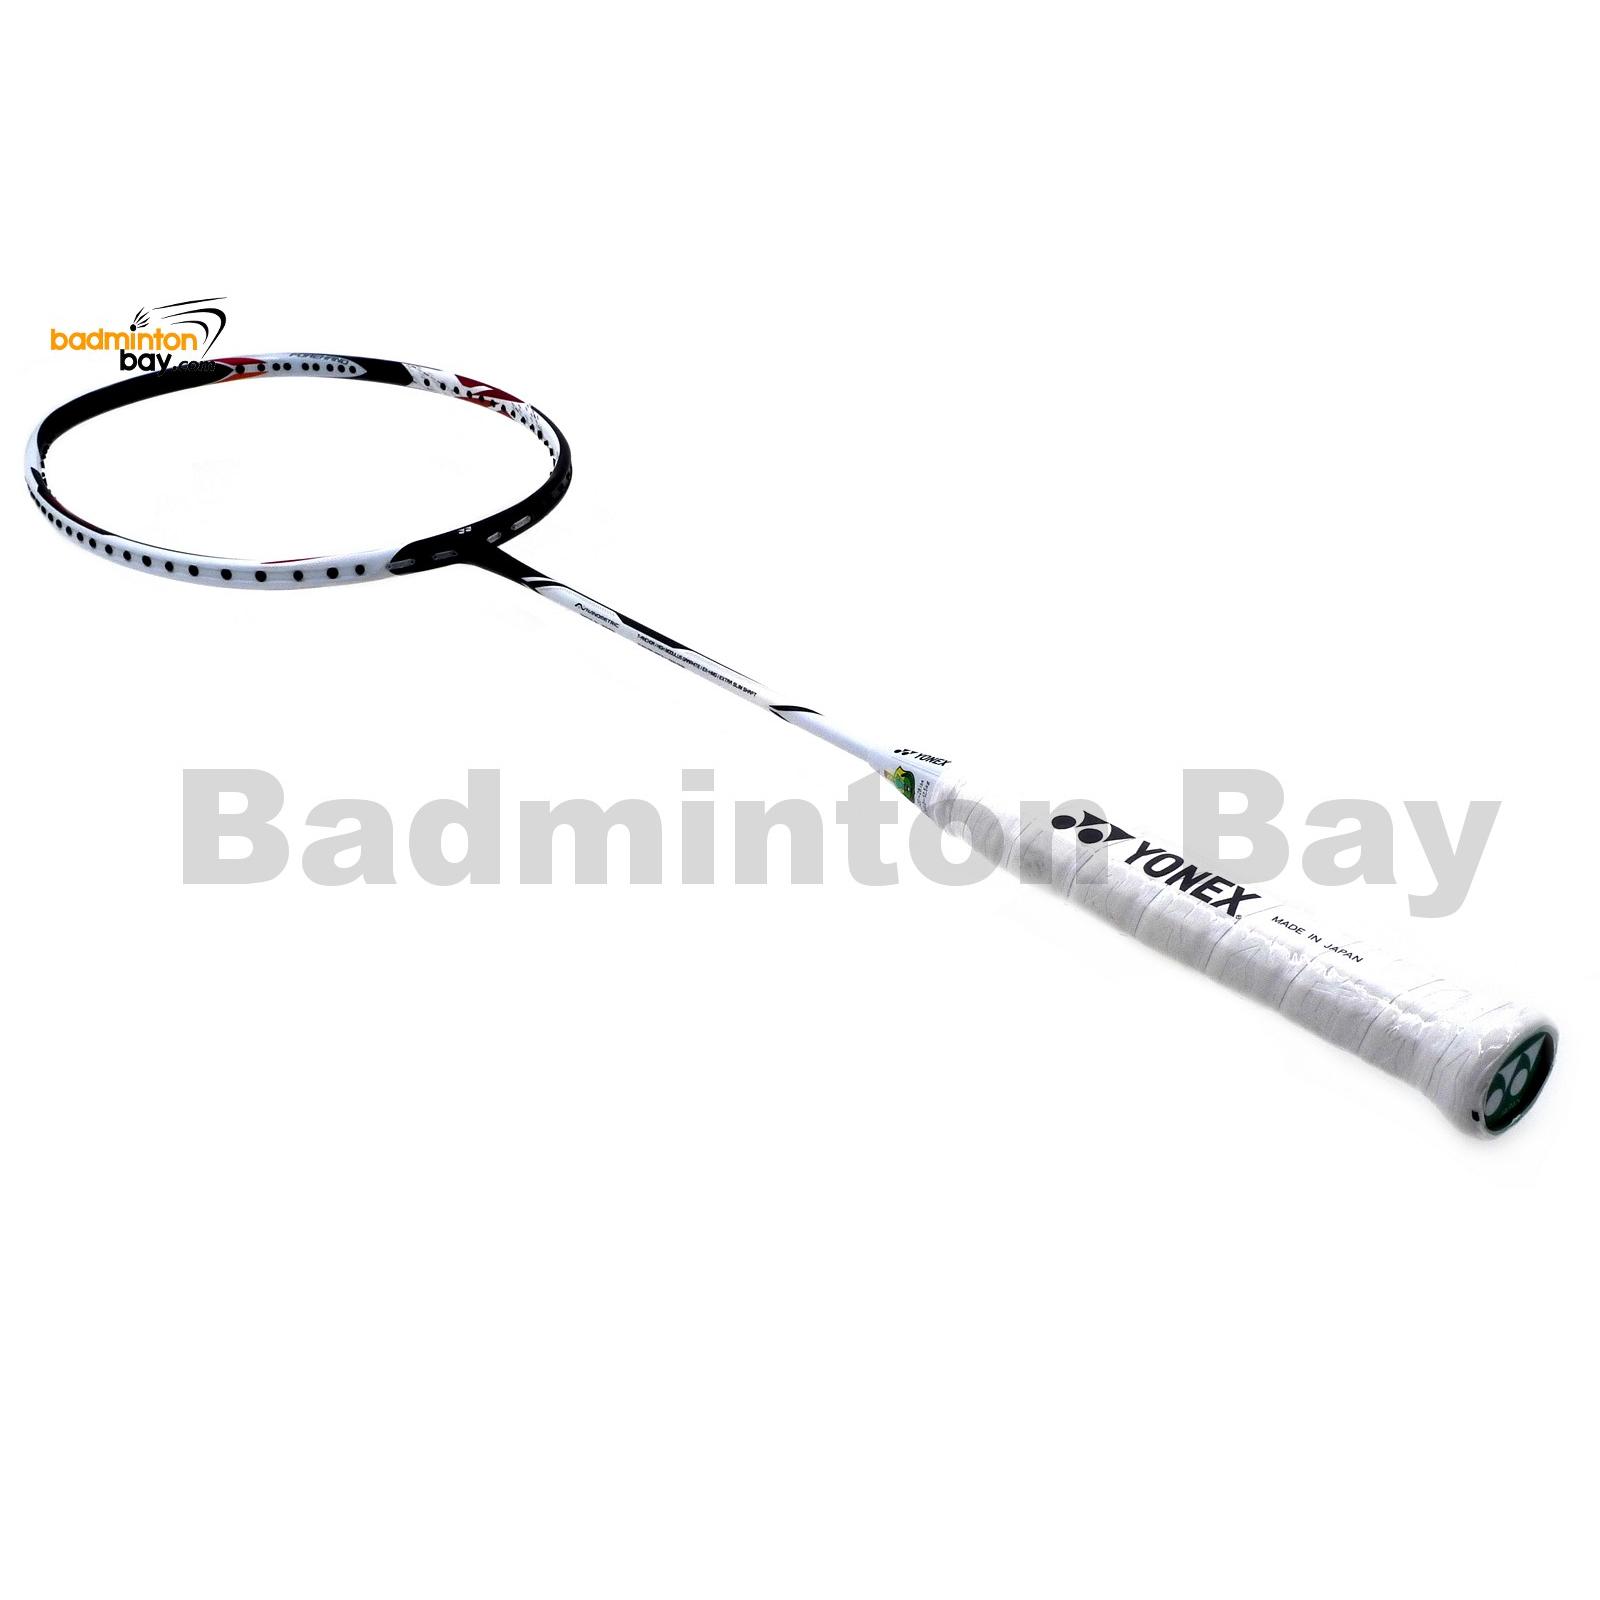 Details about   Yonex DUORA Z-STRIKE Badminton Racket Racquet Black String 3UG5 with Free Cover 